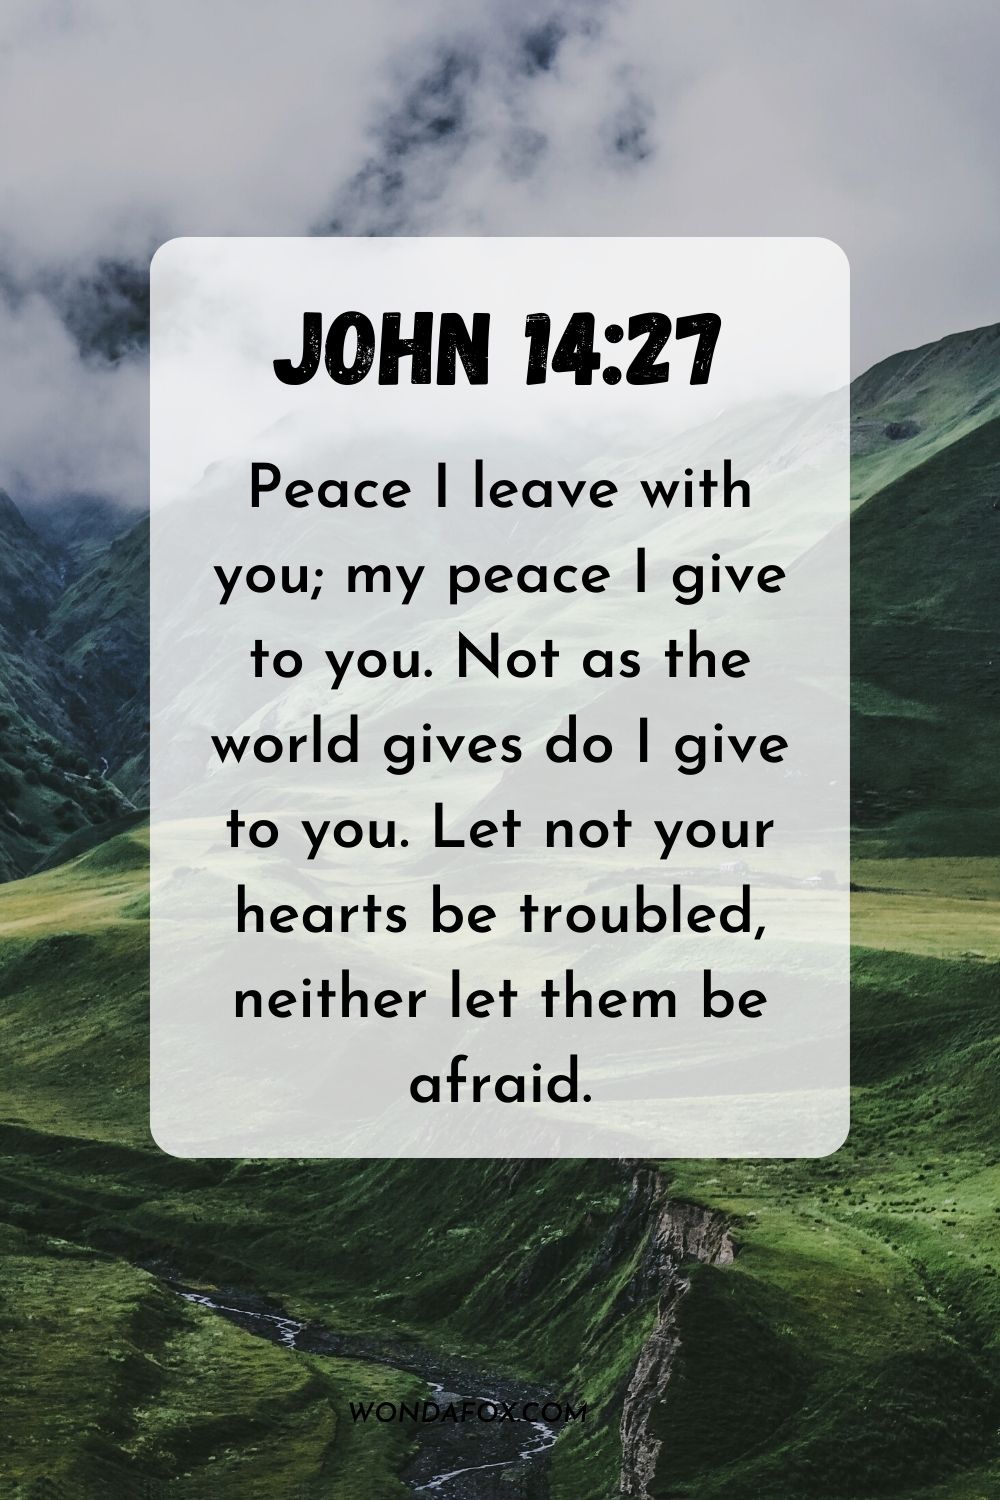 Peace I leave with you; my peace I give to you. Not as the world gives do I give to you. Let not your hearts be troubled, neither let them be afraid. John 14:27